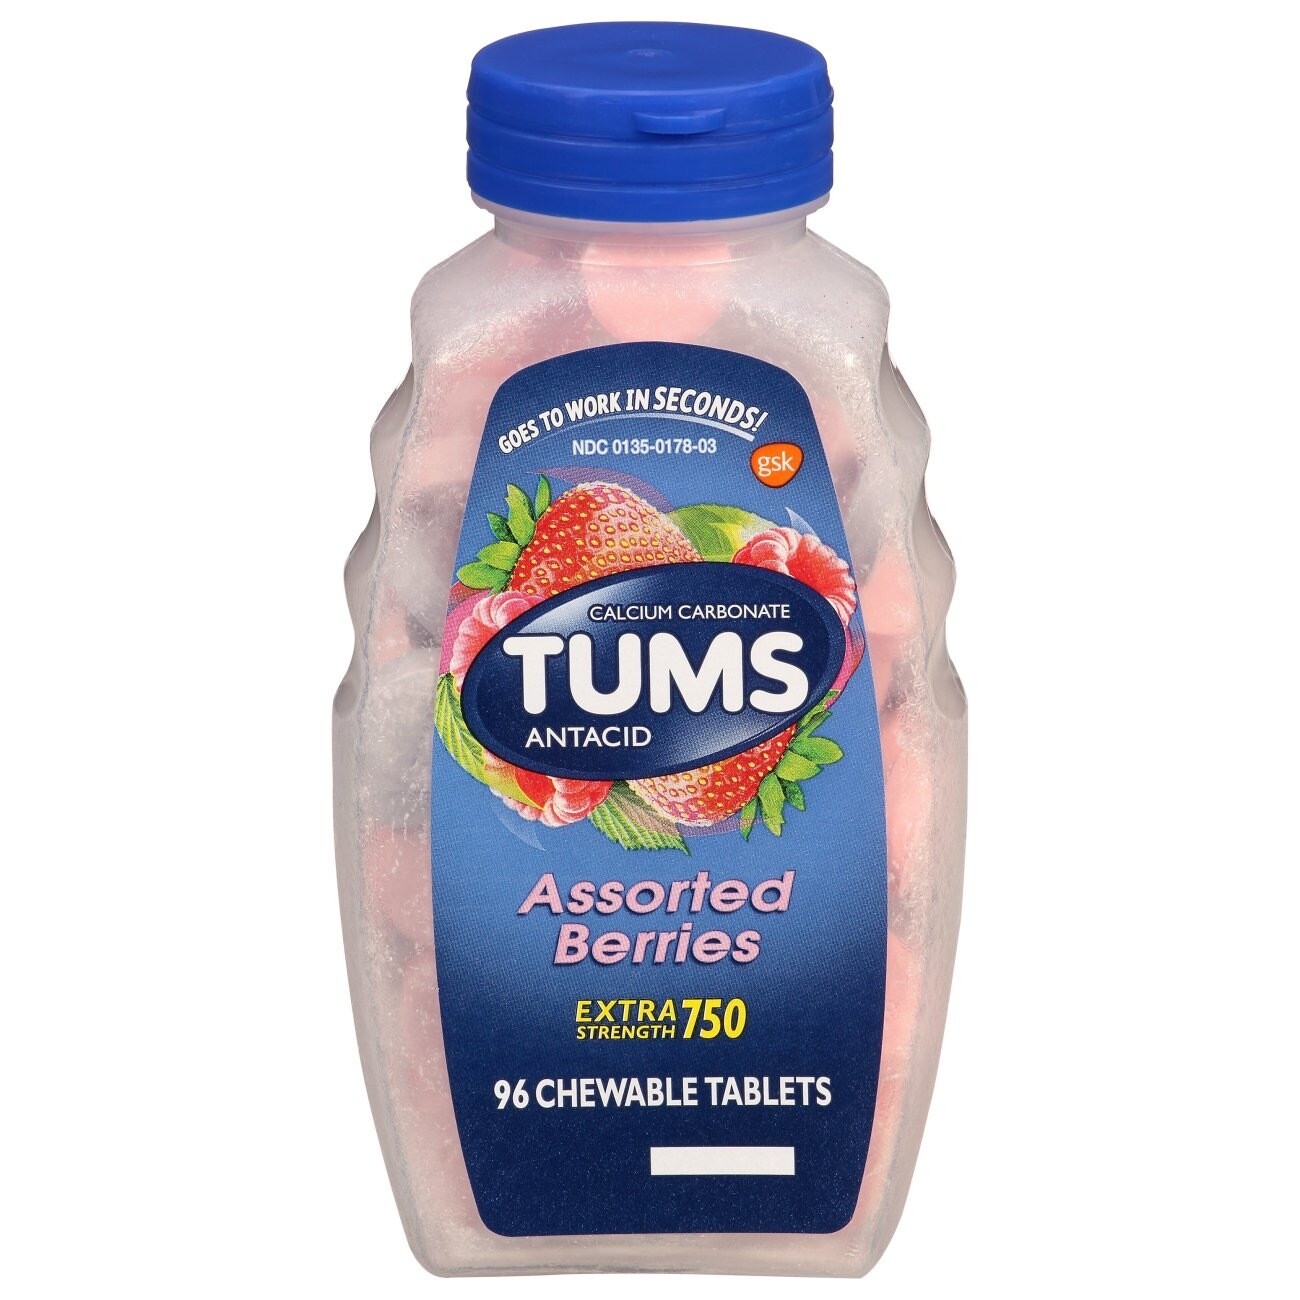 Tums Extra Strength 750 - 96 Chewable Tablets Assorted Berries